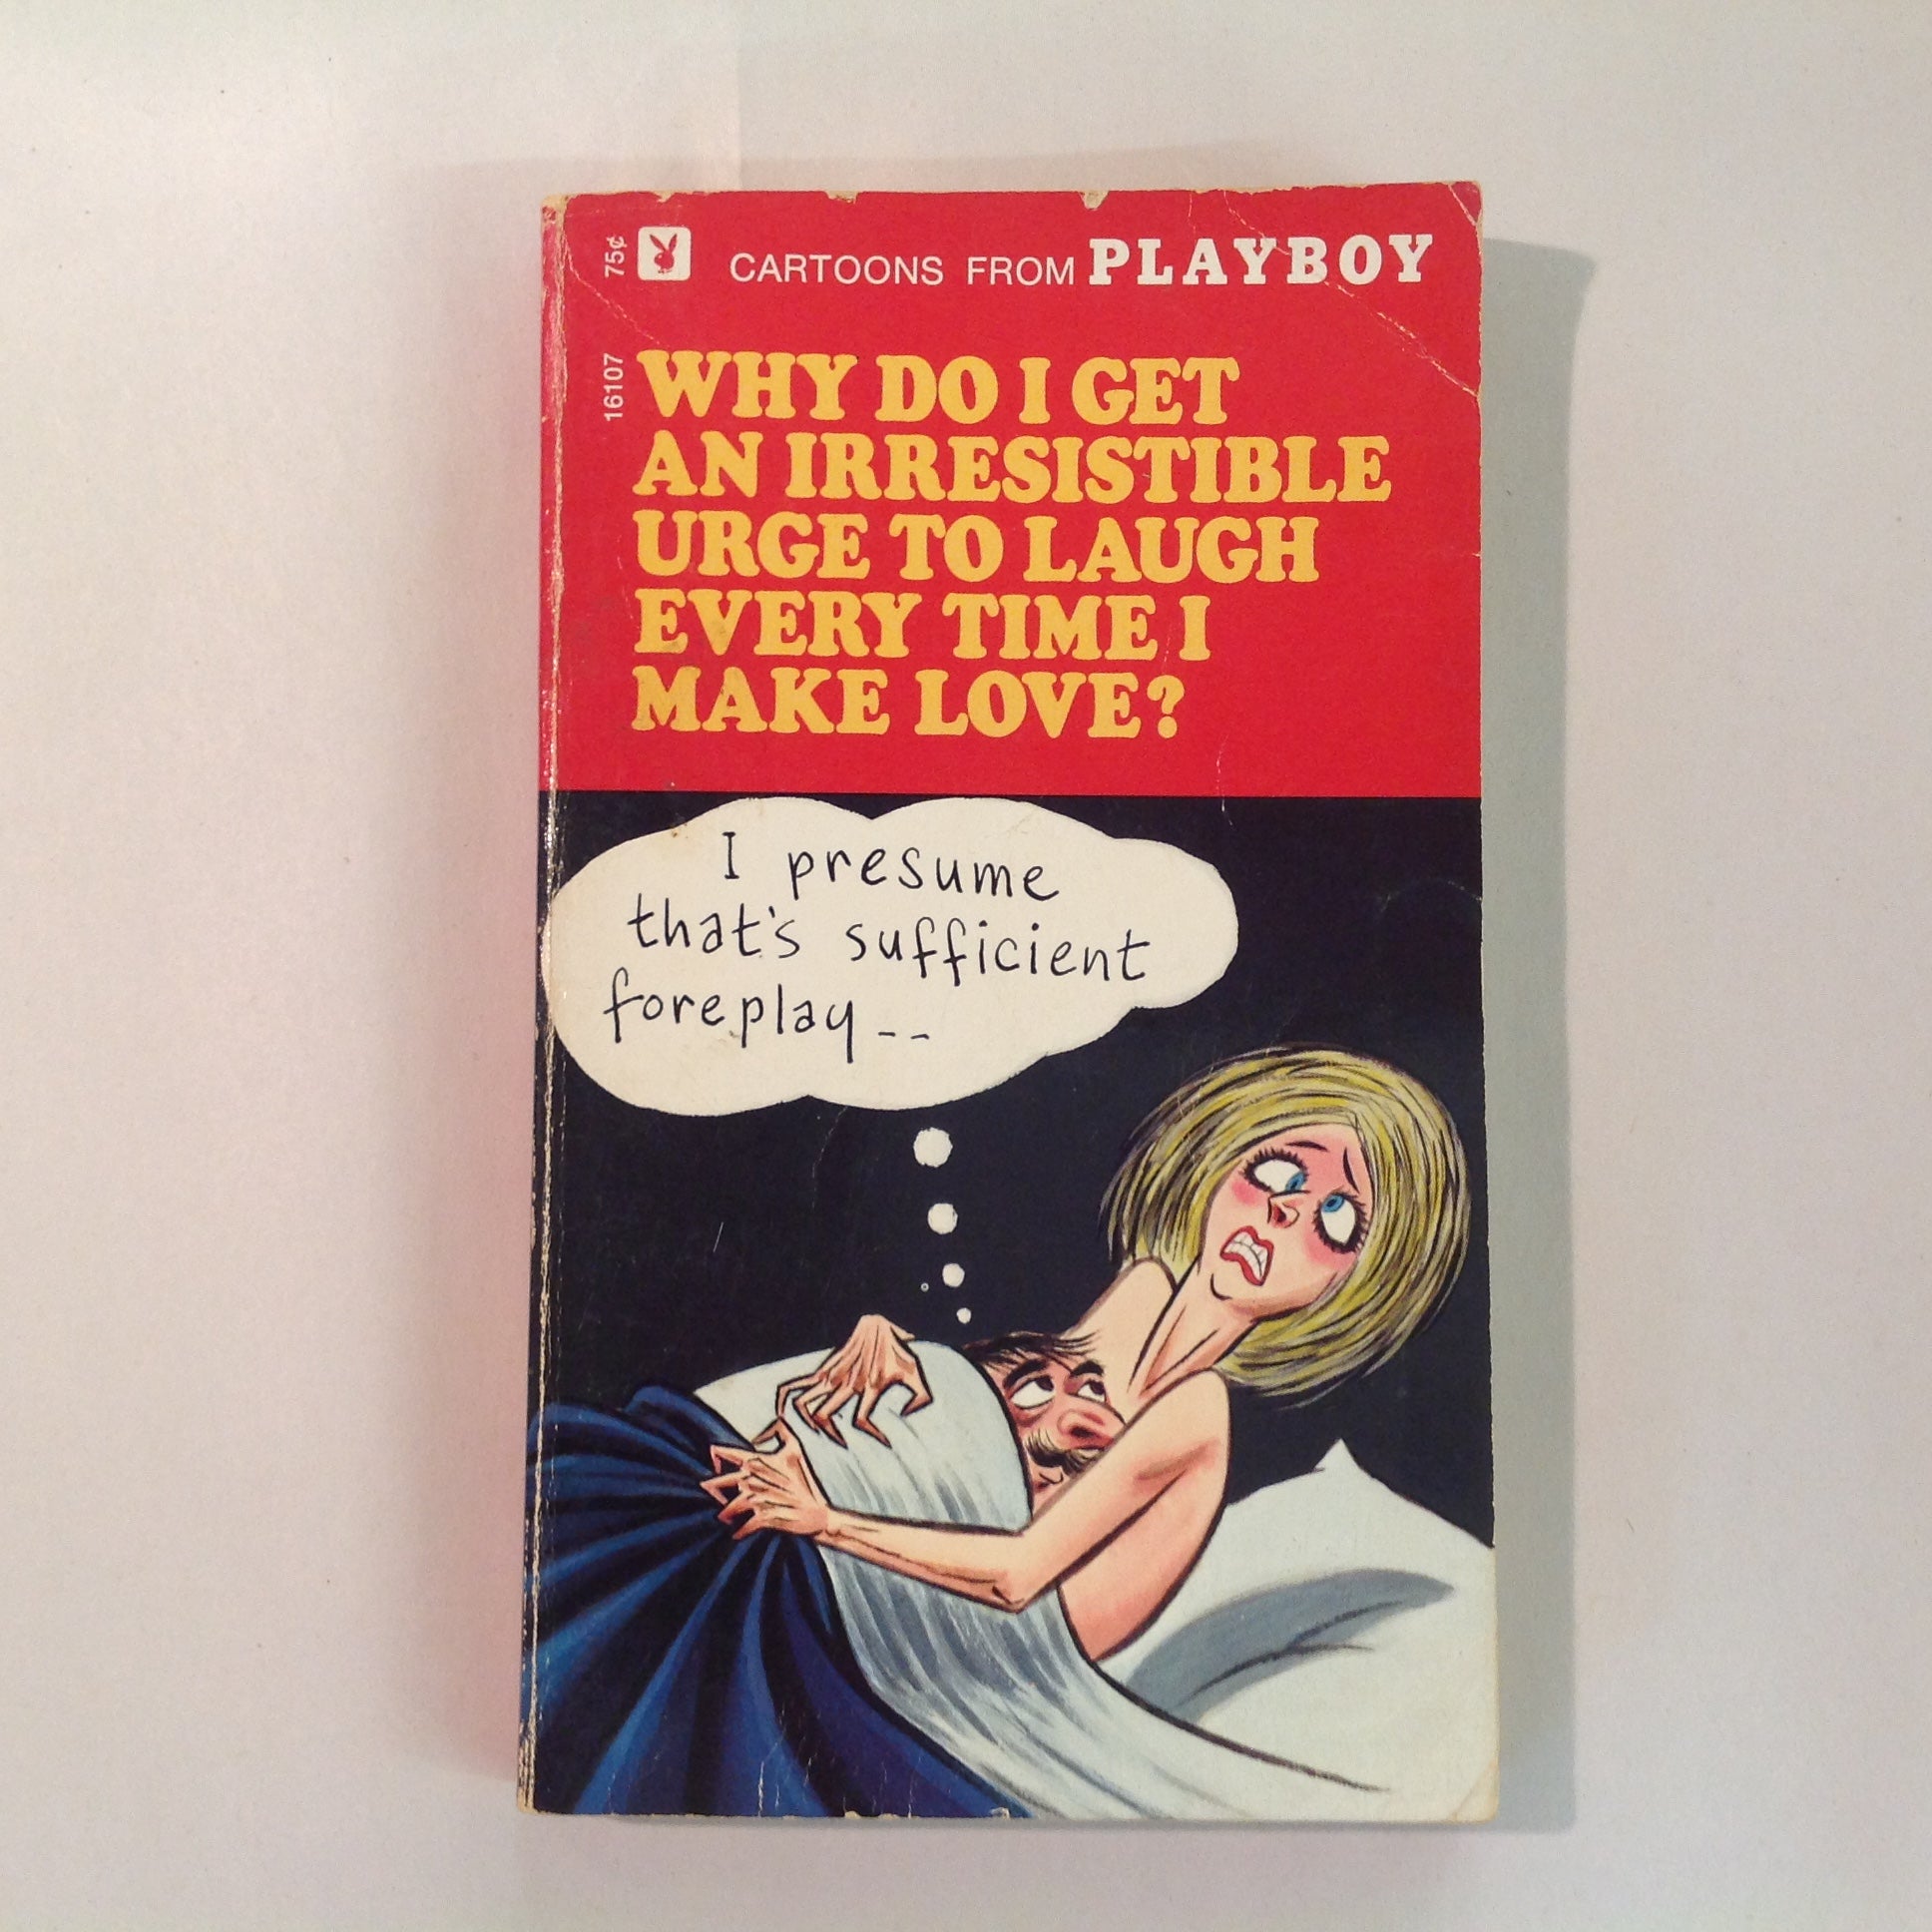 Vintage 1971 Playboy Press Paperback WHY DO I GET AN IRRESISTABLE URGE TO LAUGH EVERY TIME I MAKE LOVE? CARTOONS FROM PLAYBOY